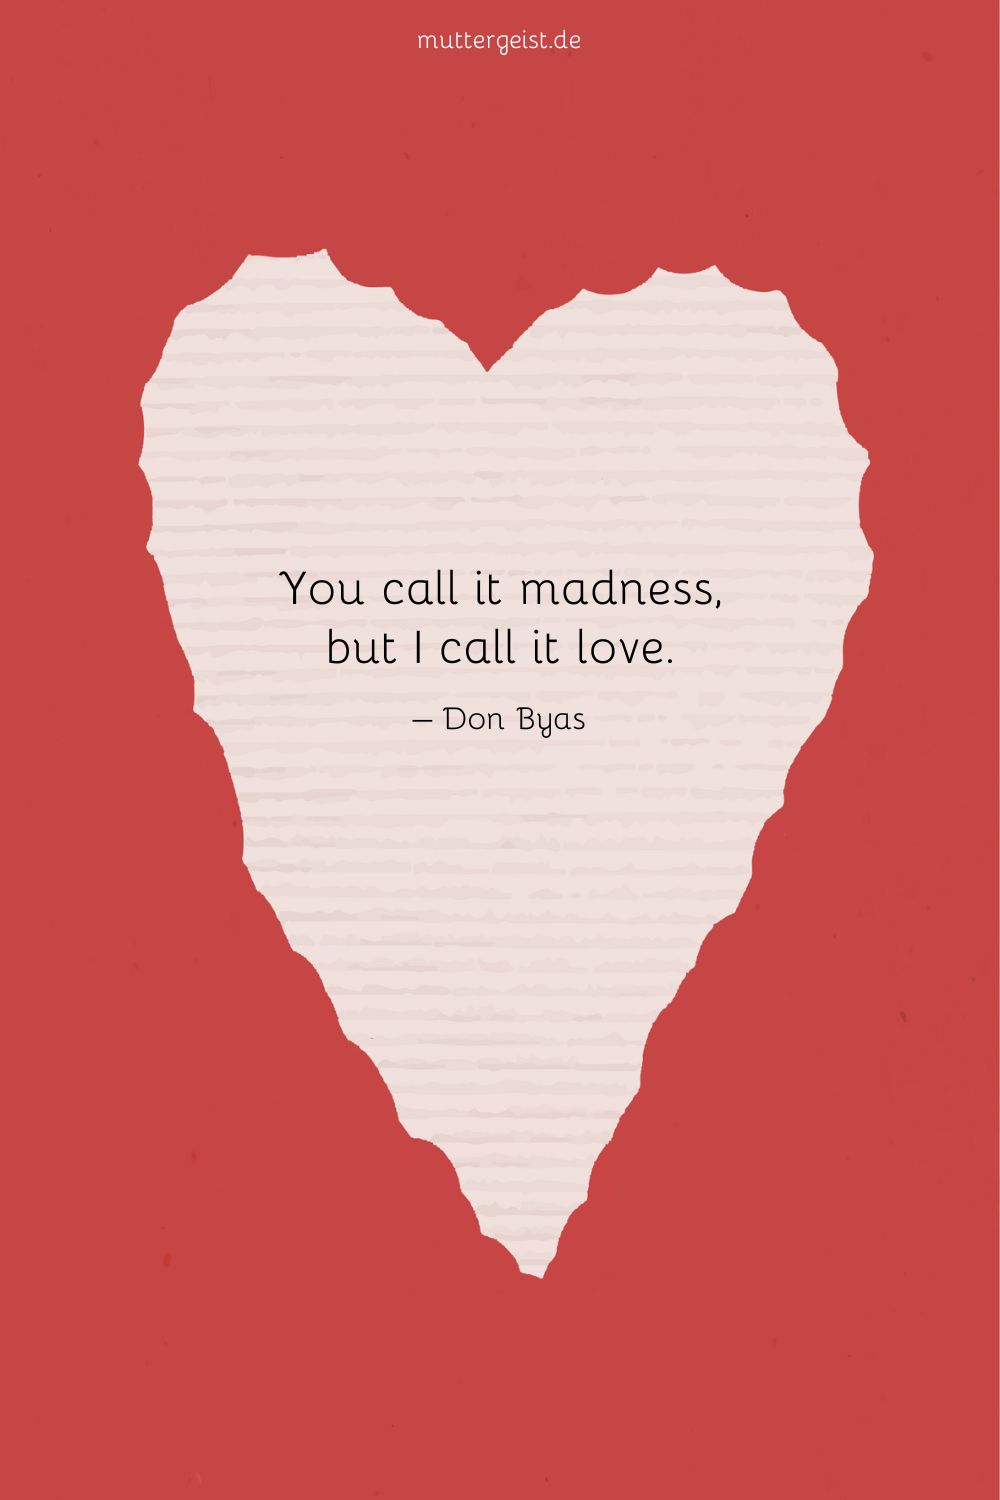 You call it madness, but I call it love.